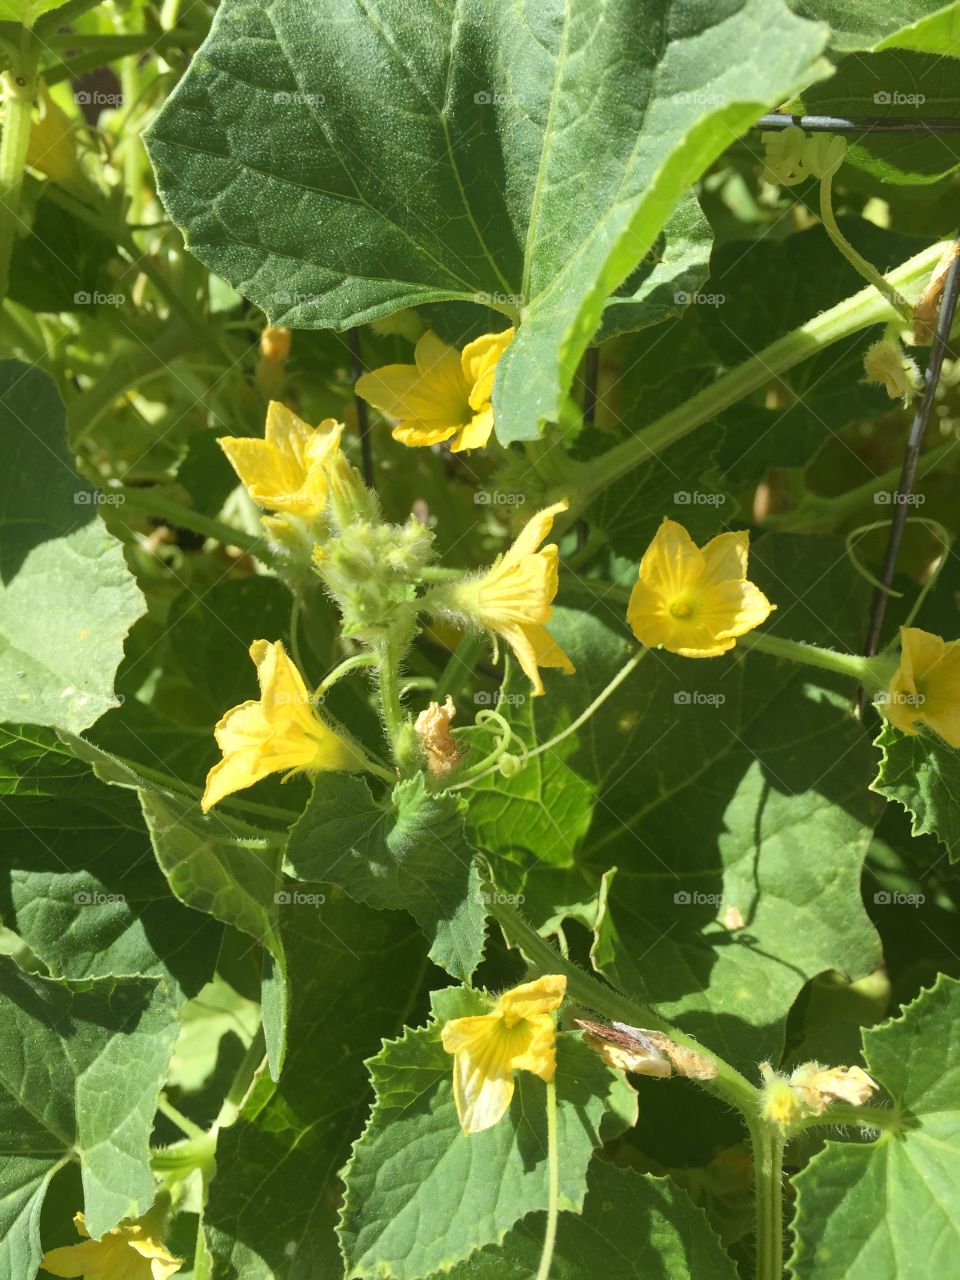 Cucumber flowers, the power of yellow.